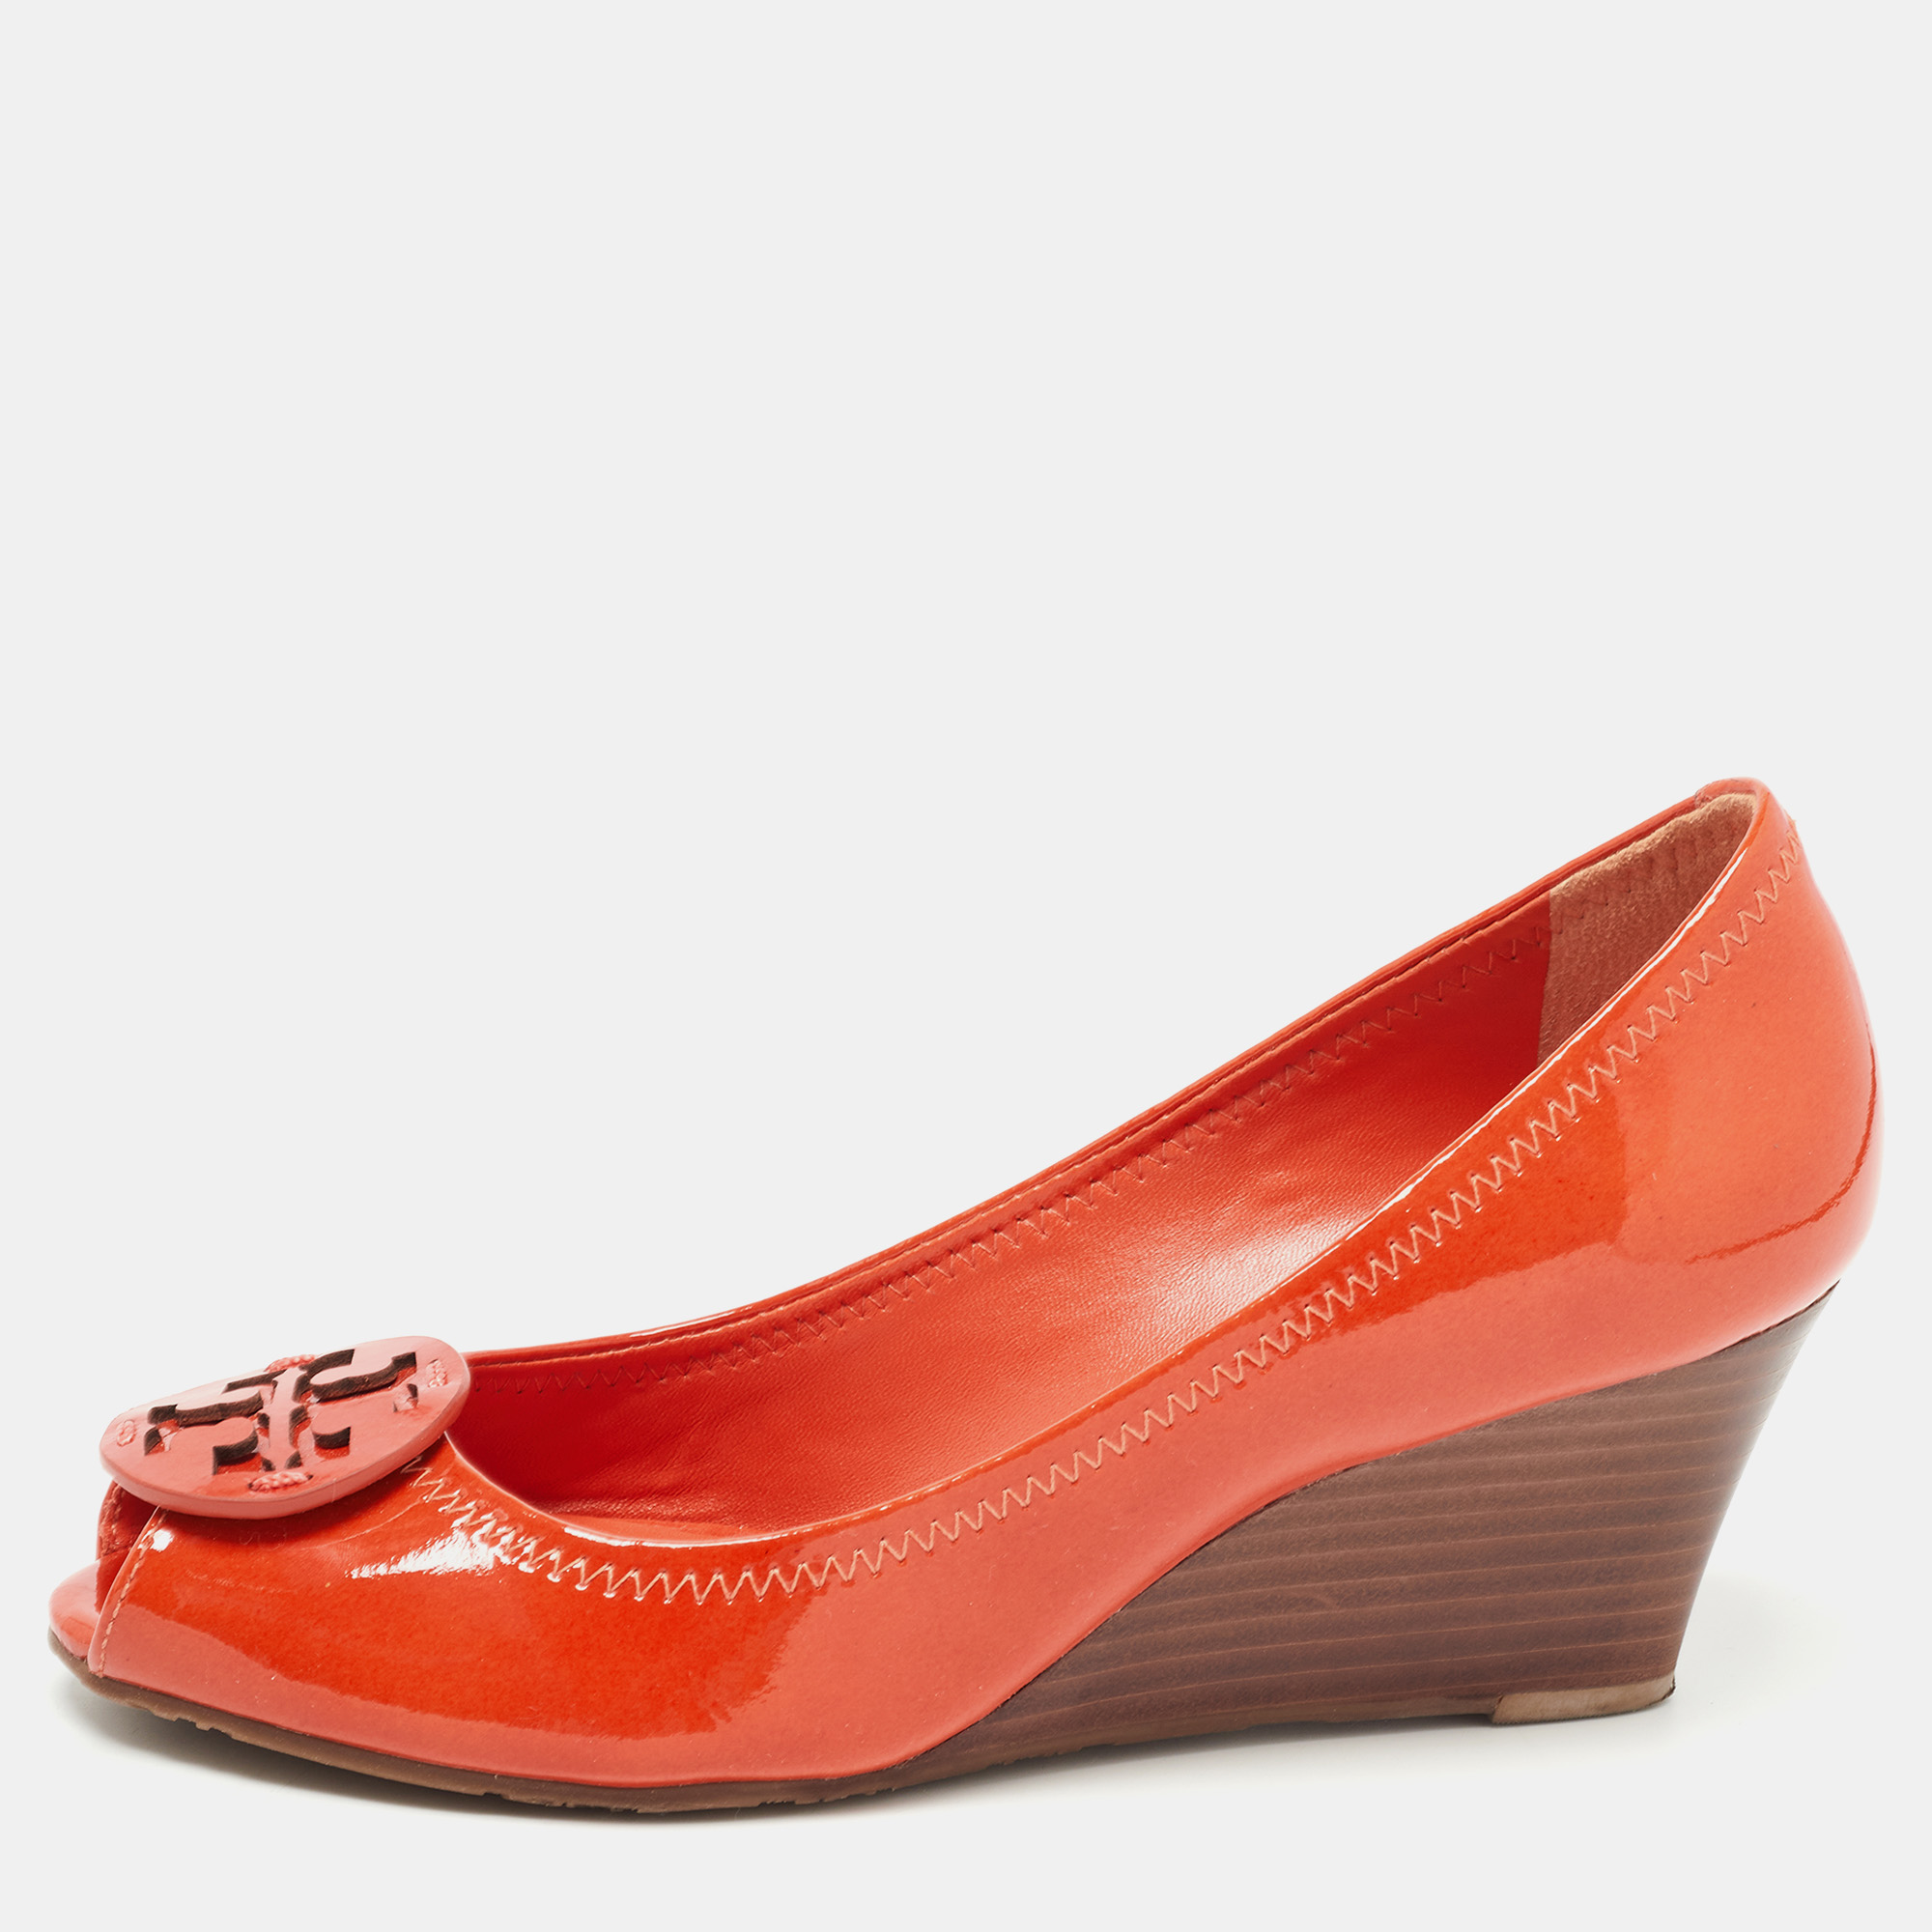 Pre-owned Tory Burch Orange Patent Leather Sally Logo Wedge Peep Toe Pumps Size 38.5